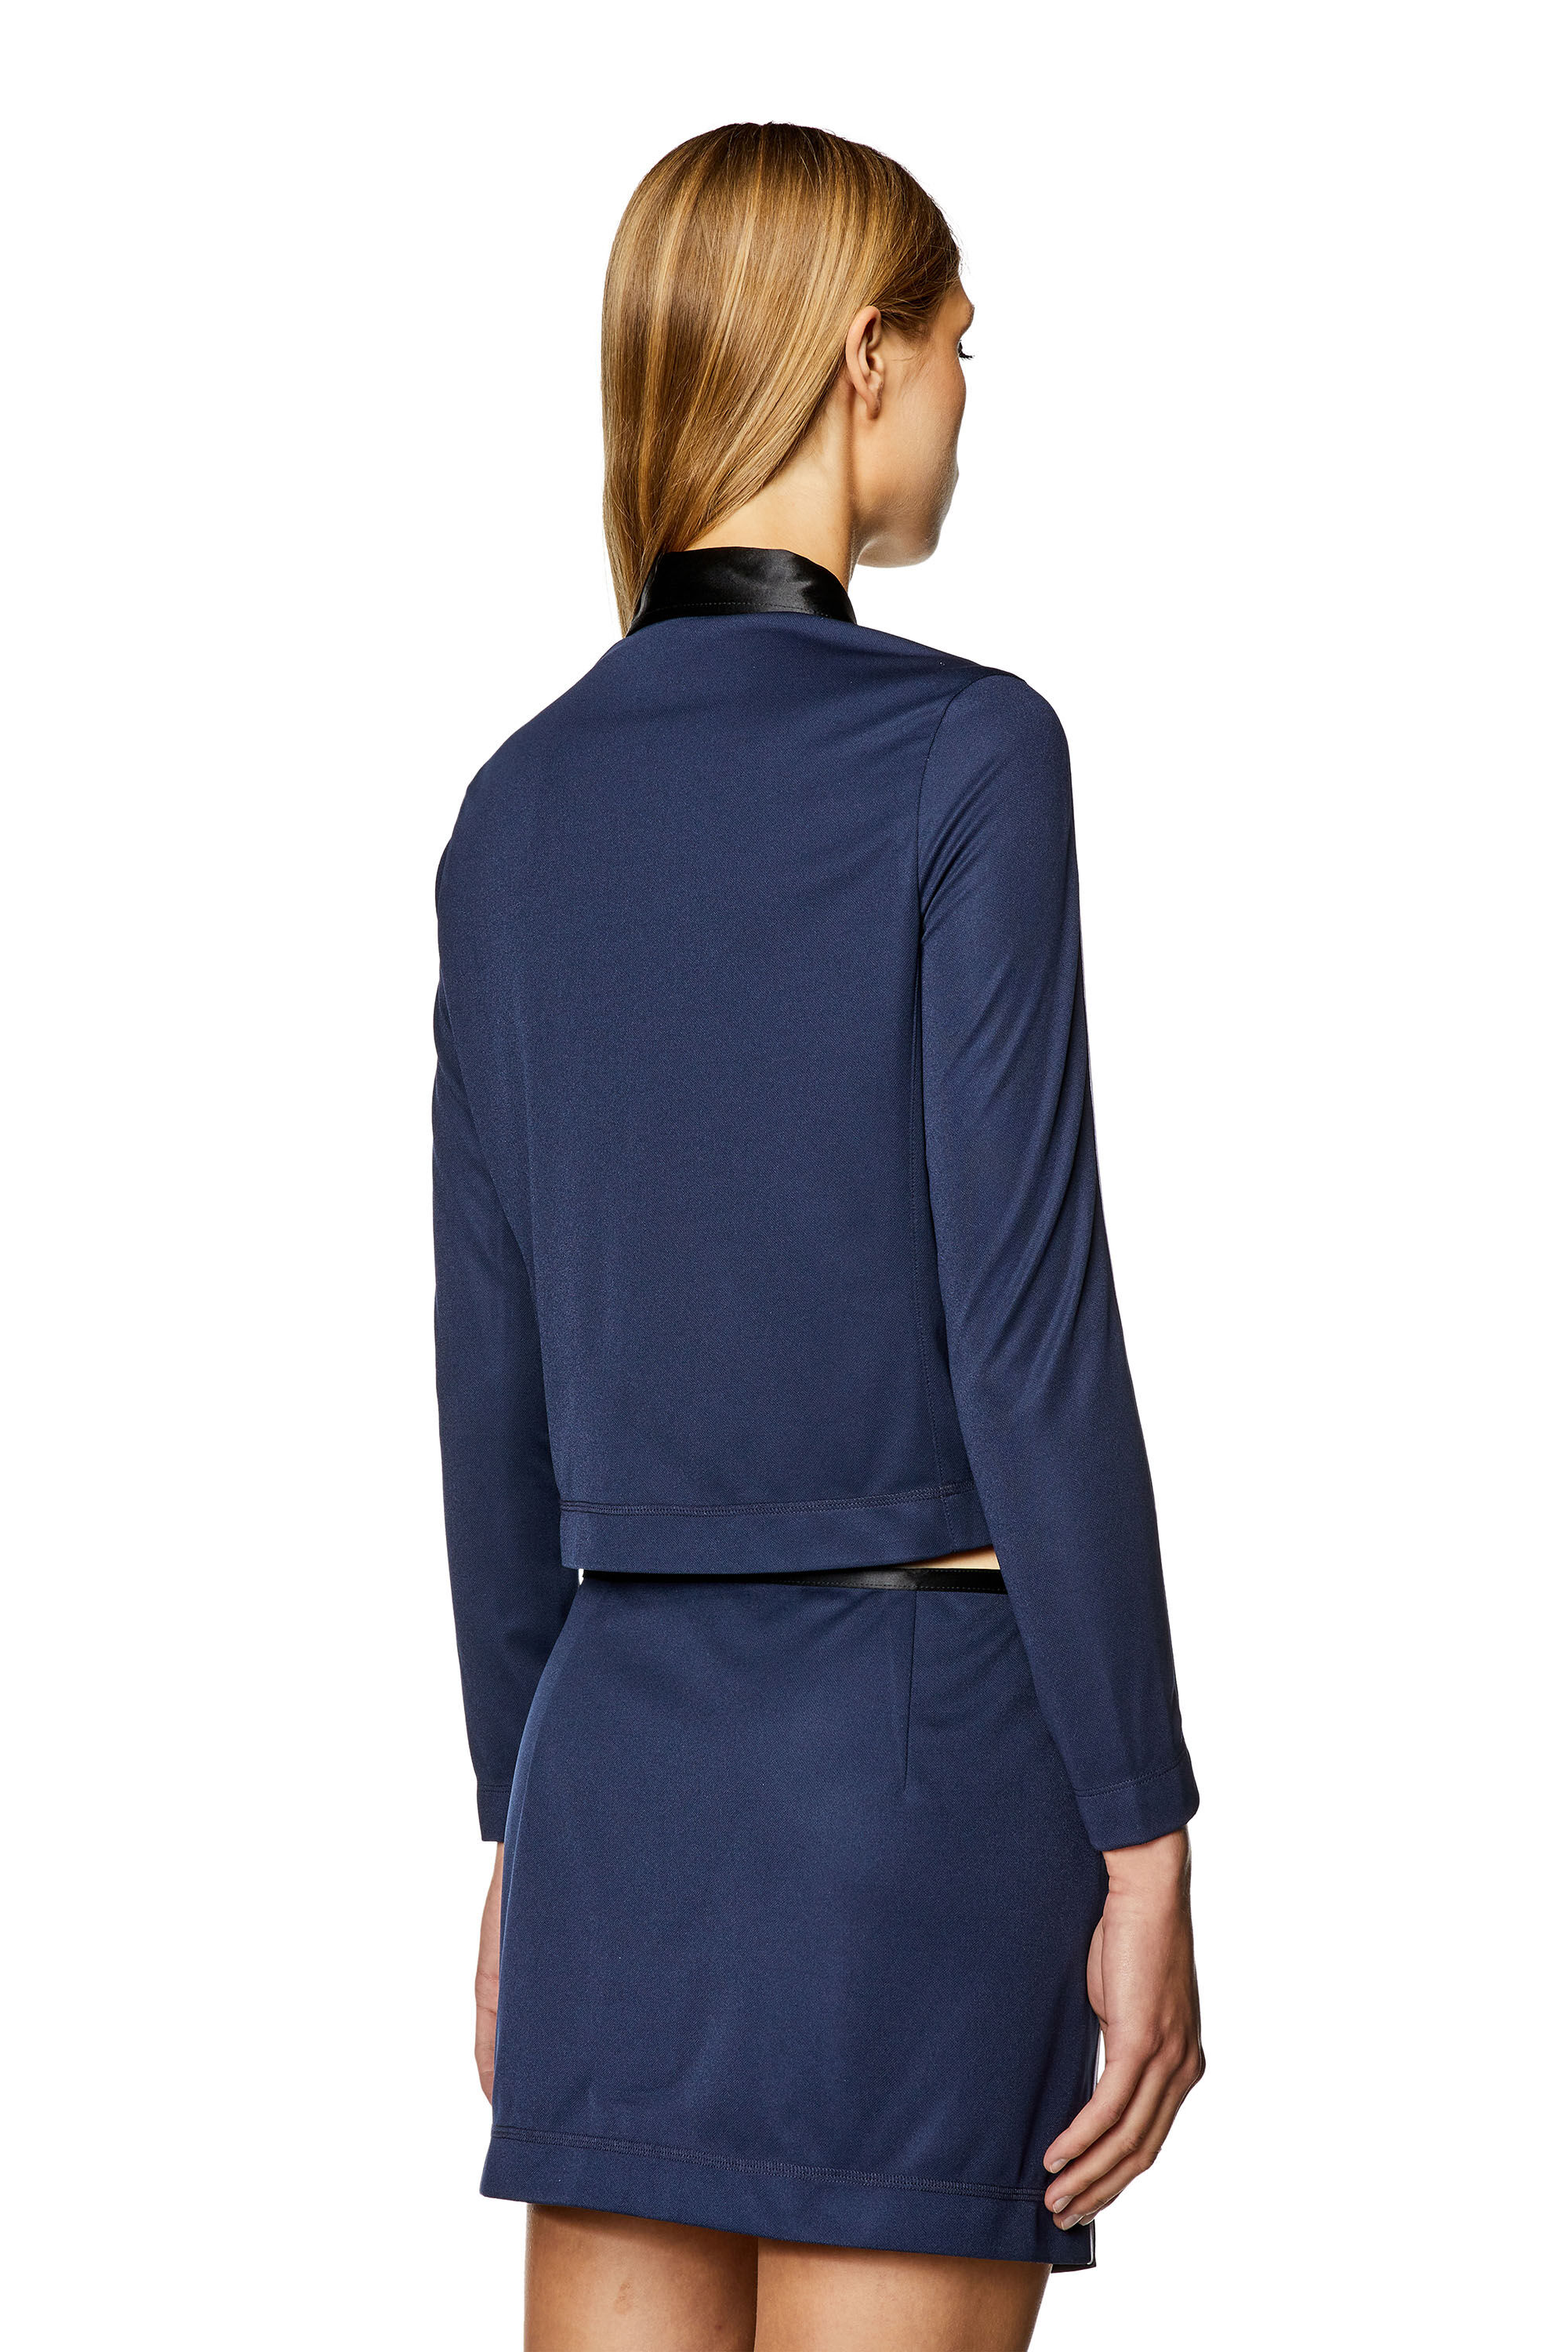 Women's Shirt-jacket in satin and double knit